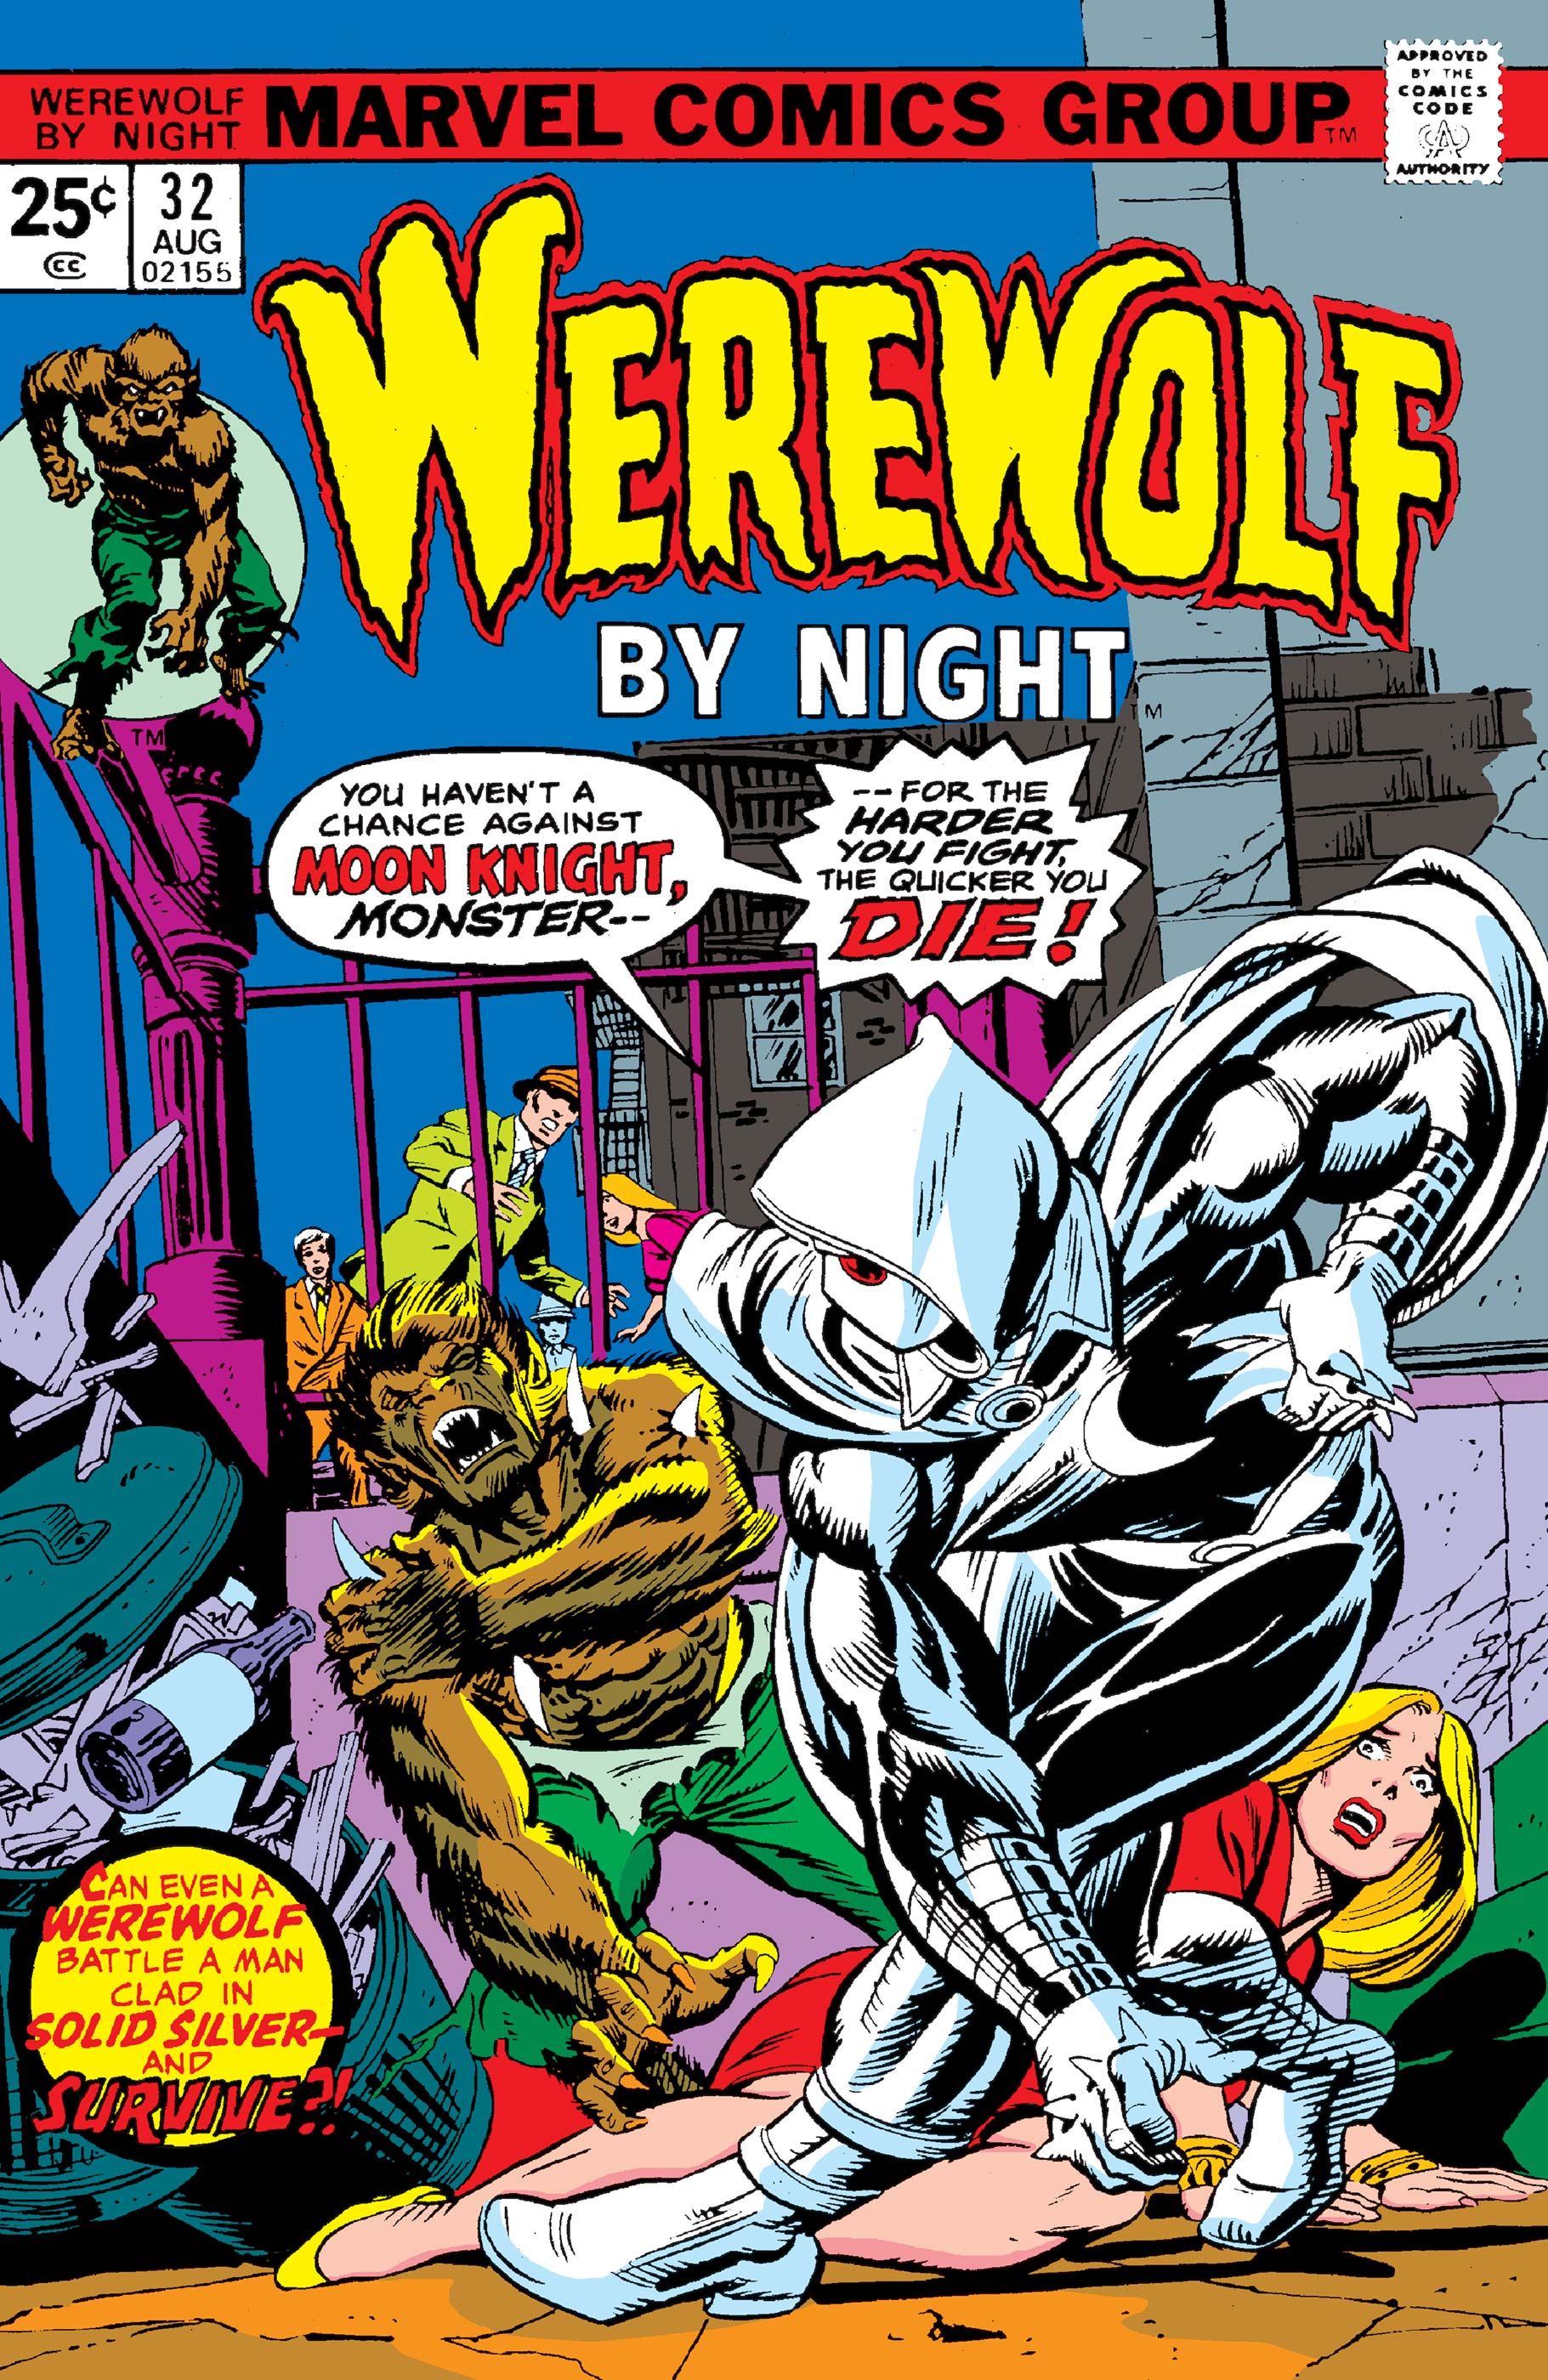 The cover of Werewolf by Night #32